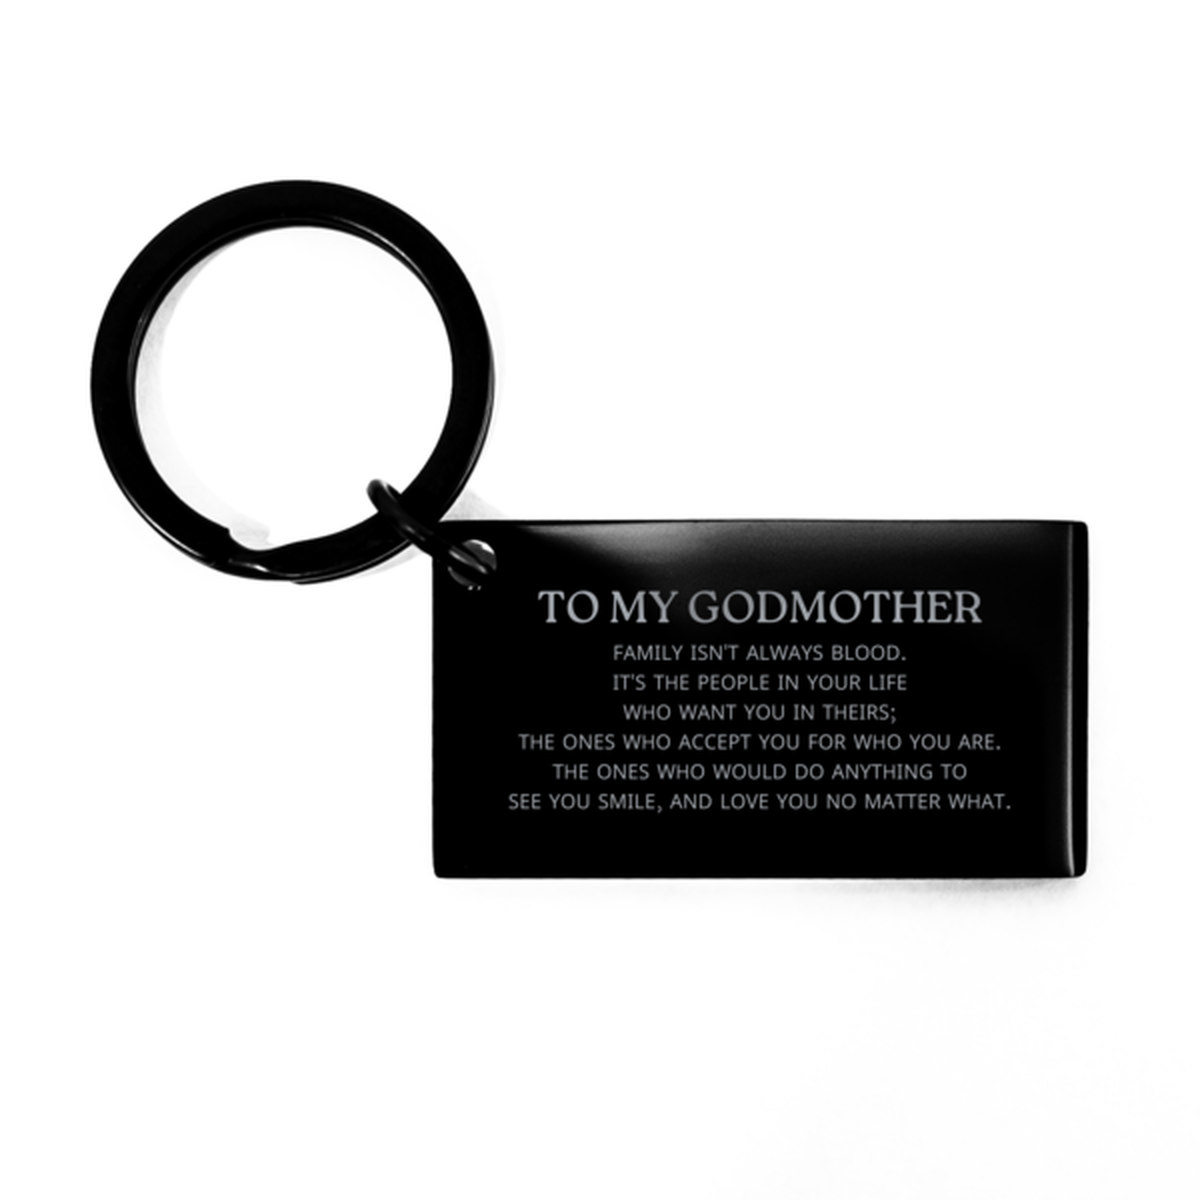 To My Godmother Gifts, Family isn't always blood, Godmother Keychain, Birthday Christmas Unique Present For Godmother